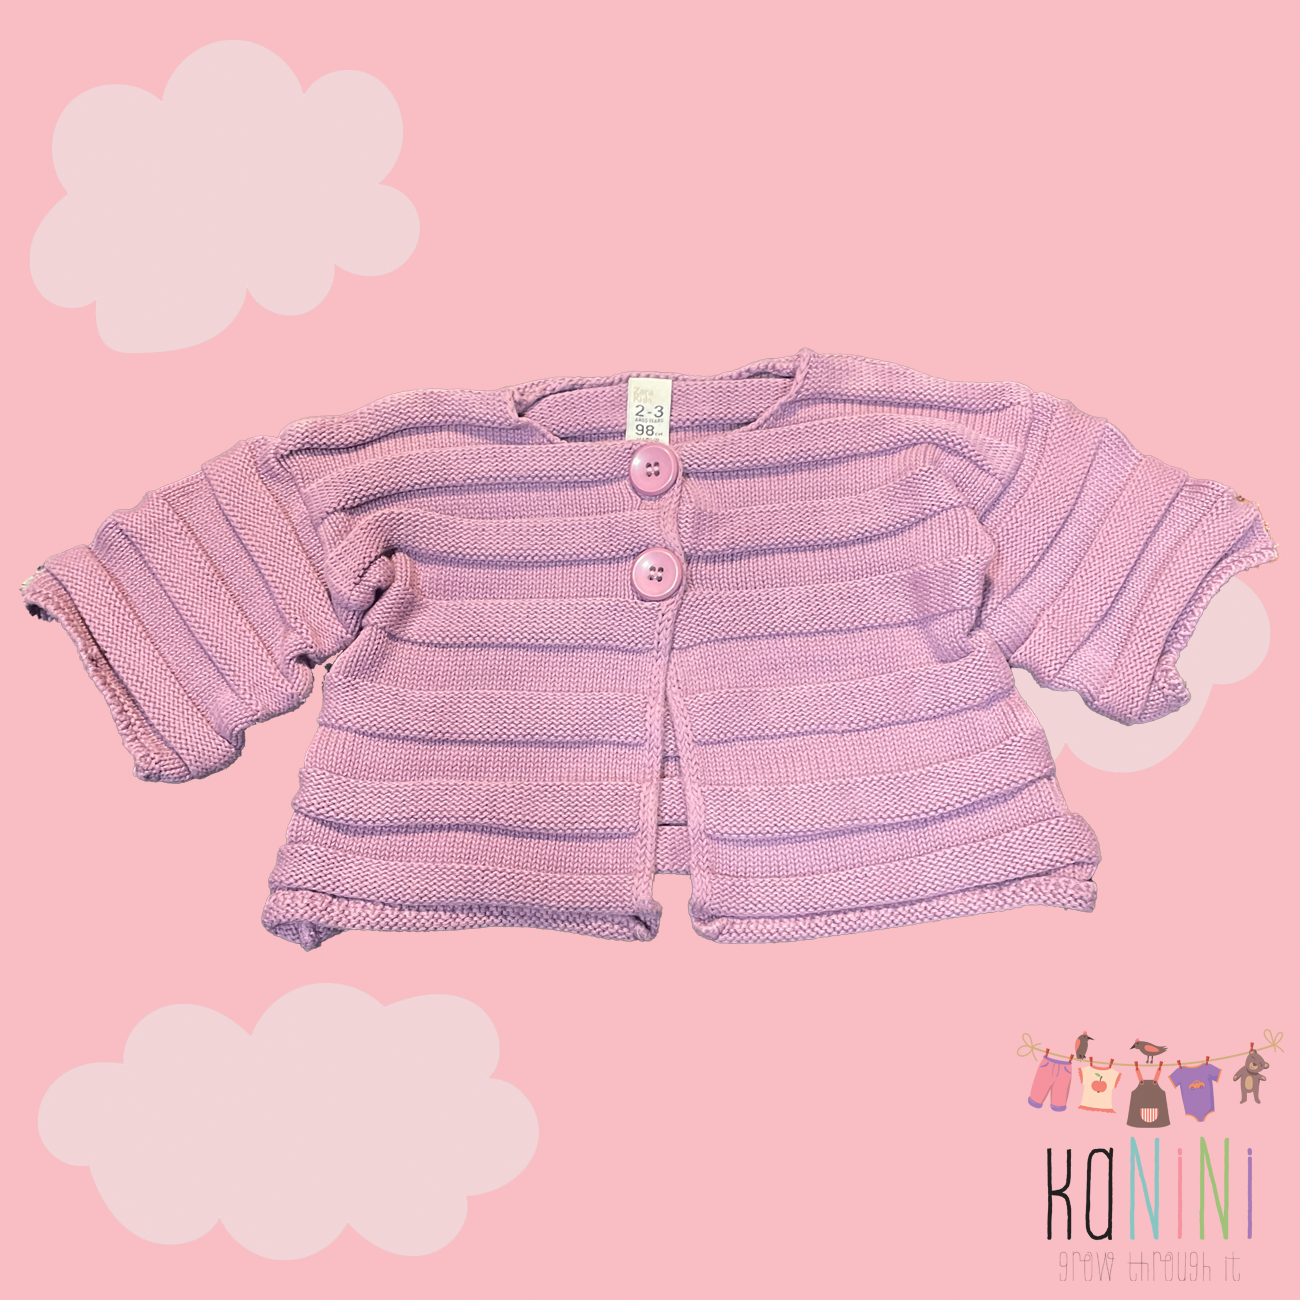 Featured image for “ZARA 2 - 3 Years Girls Purple Knitted Jersey”